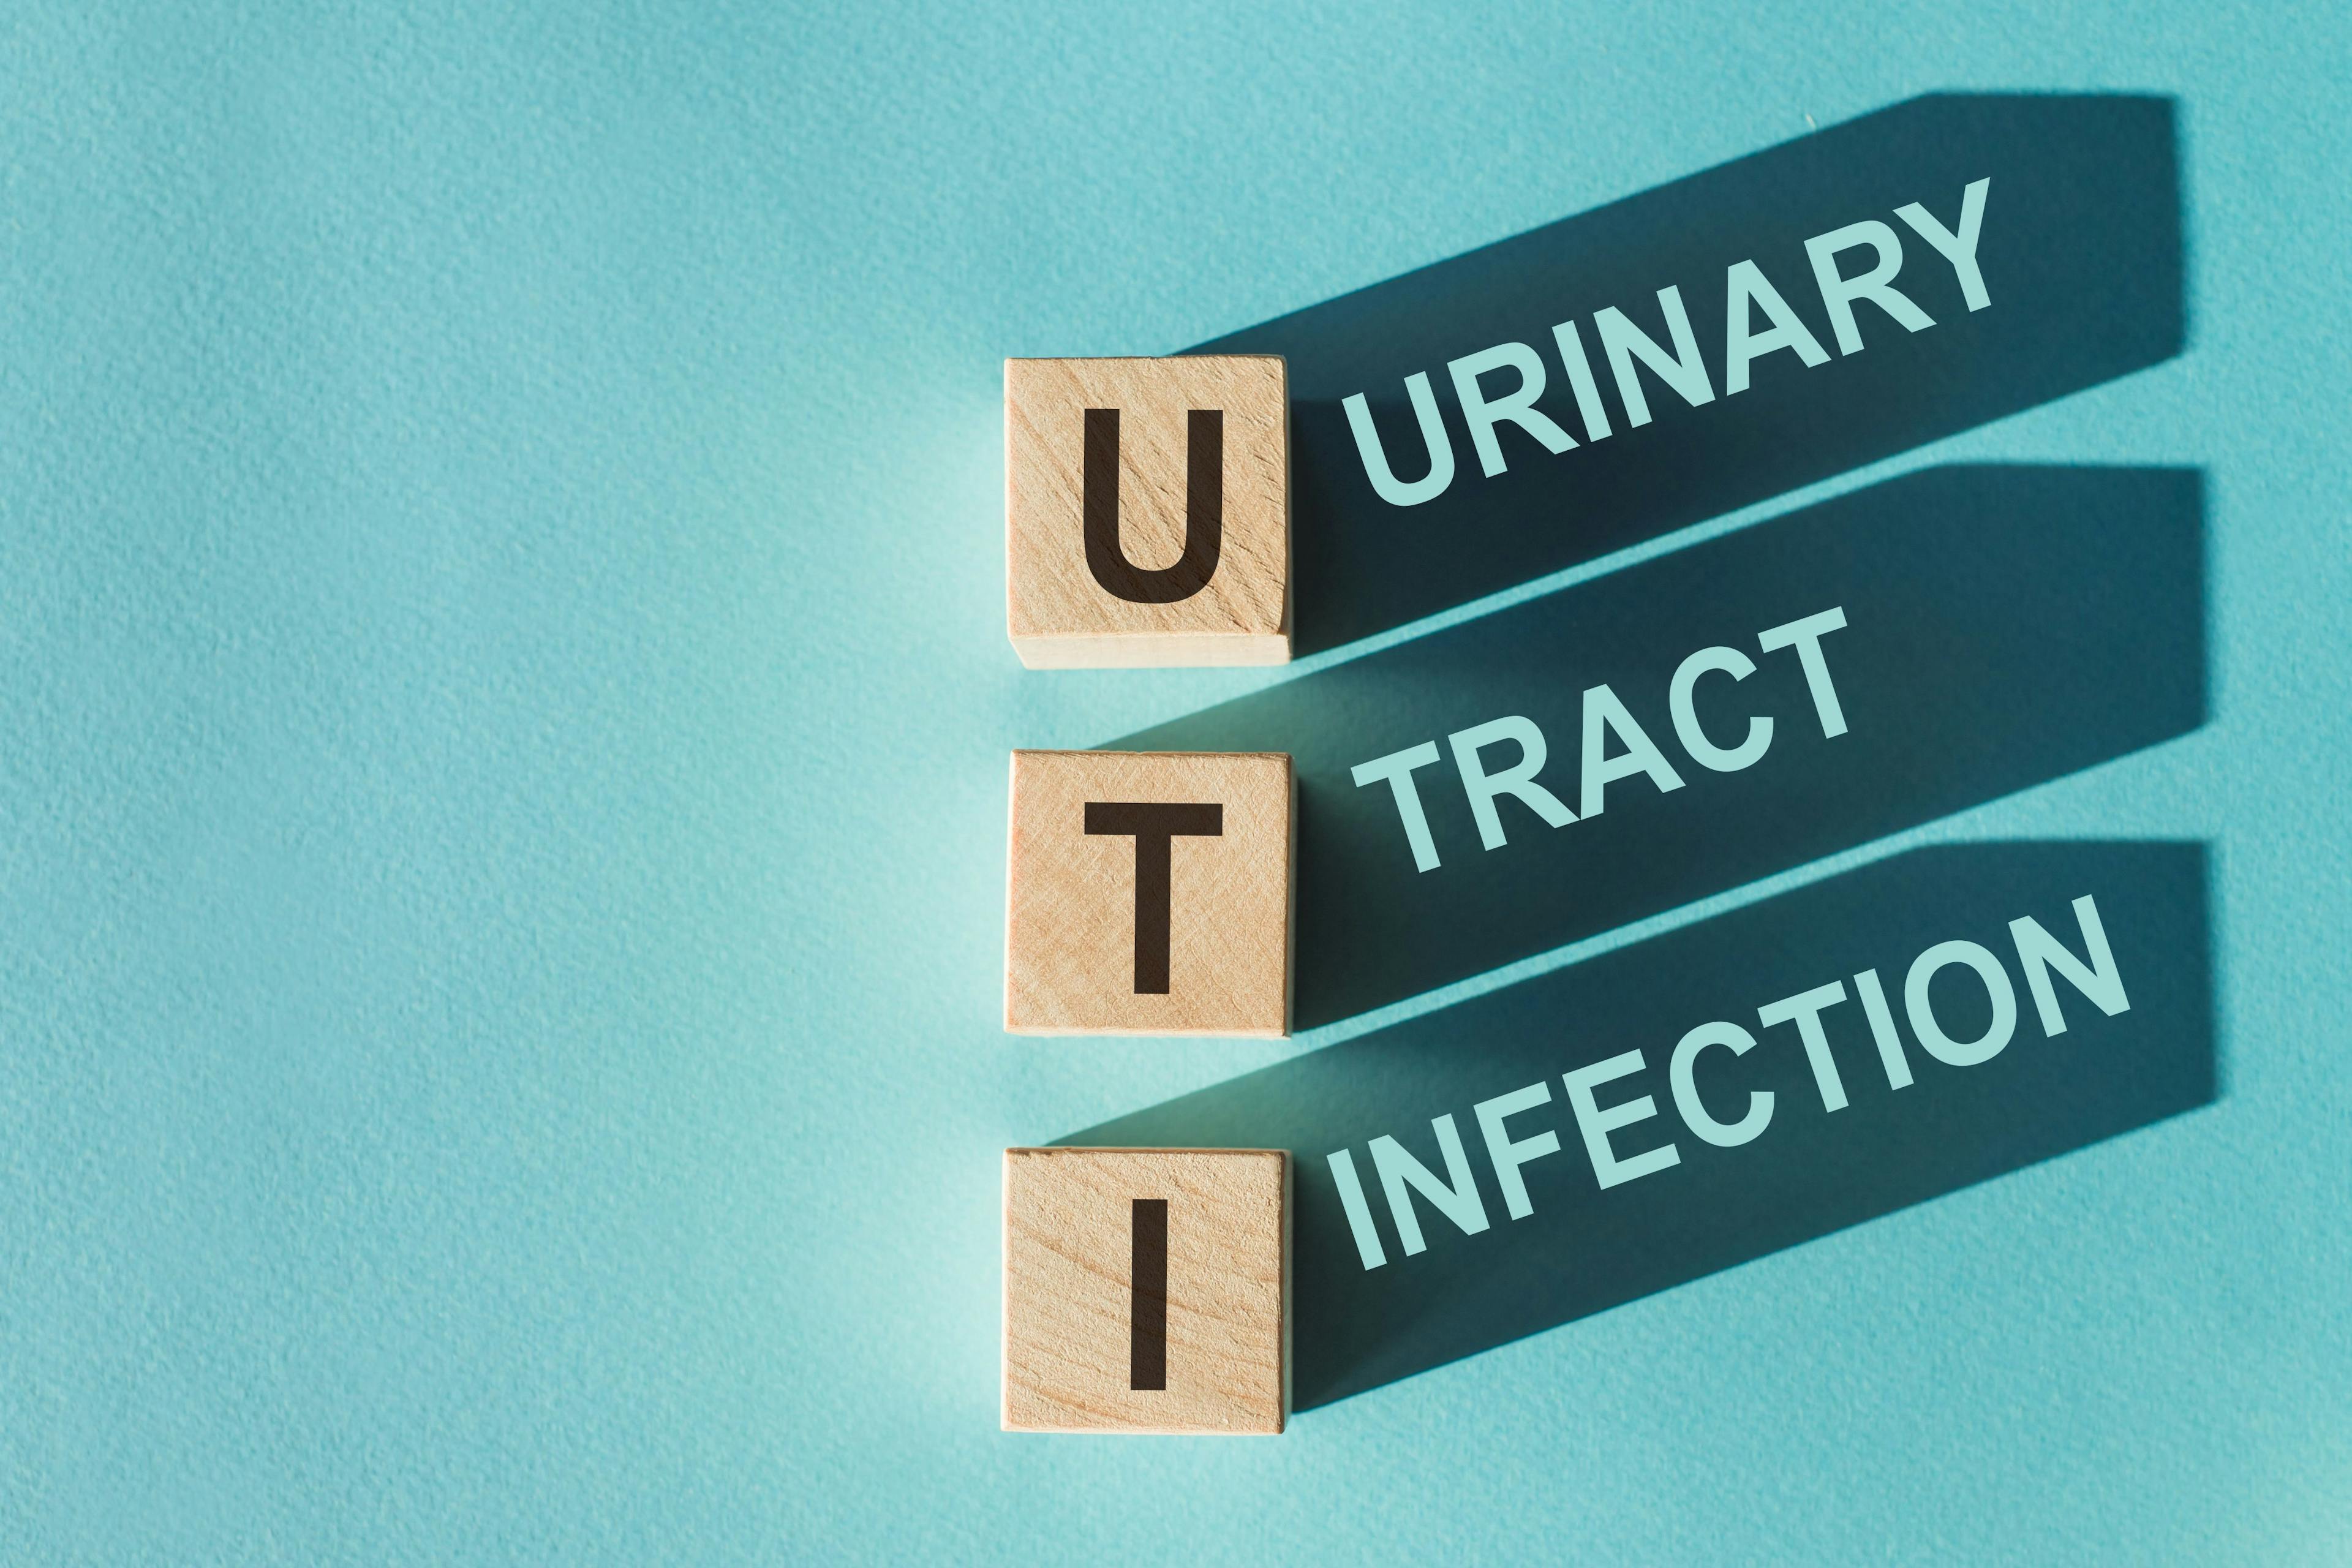 FDA: Exblifep Approved for Complicated Urinary Tract Infections